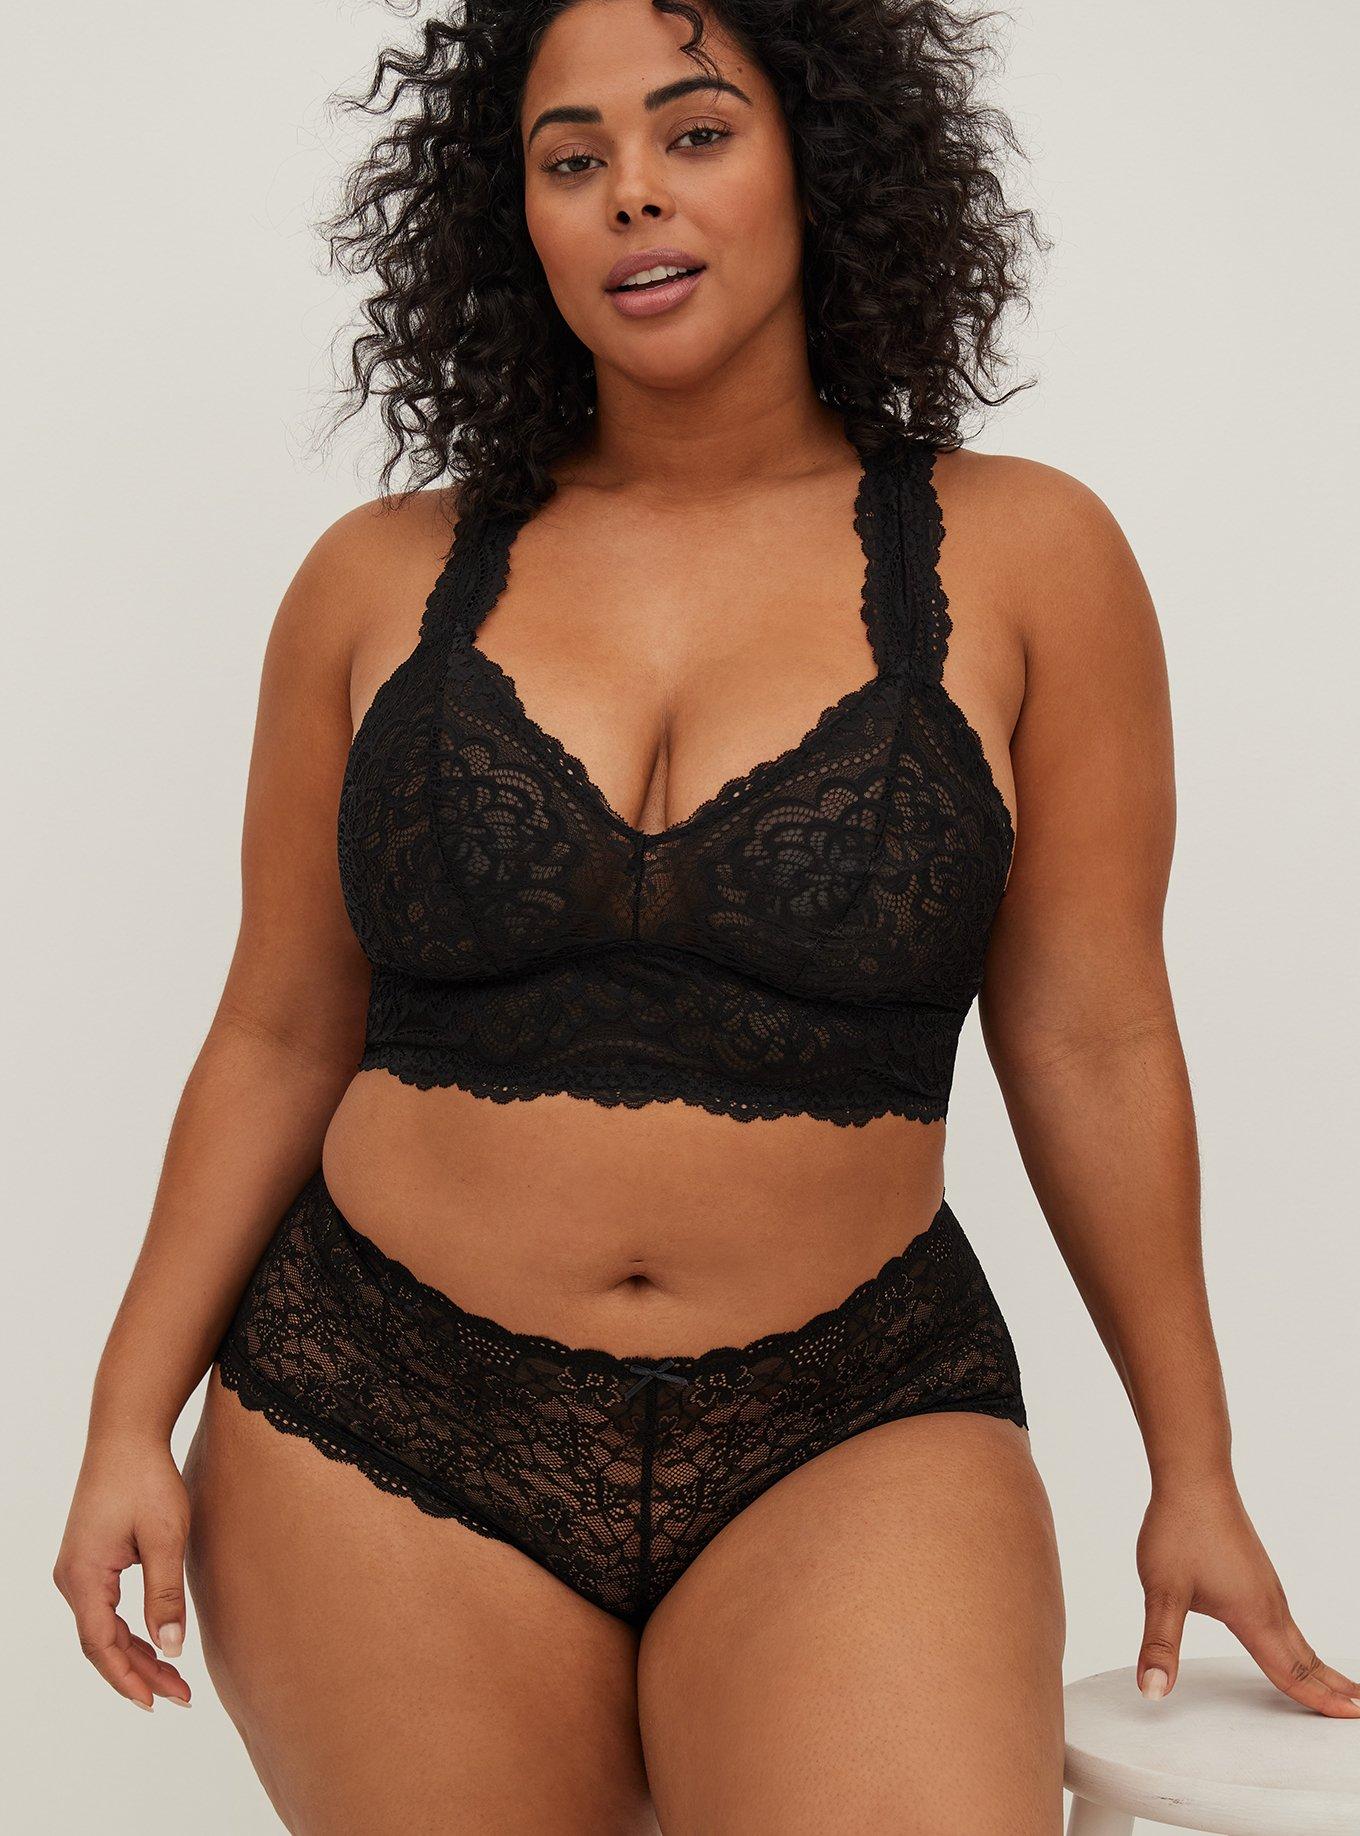 Plus Size - Full-Coverage Unlined Lace Straight Back Bra - Torrid